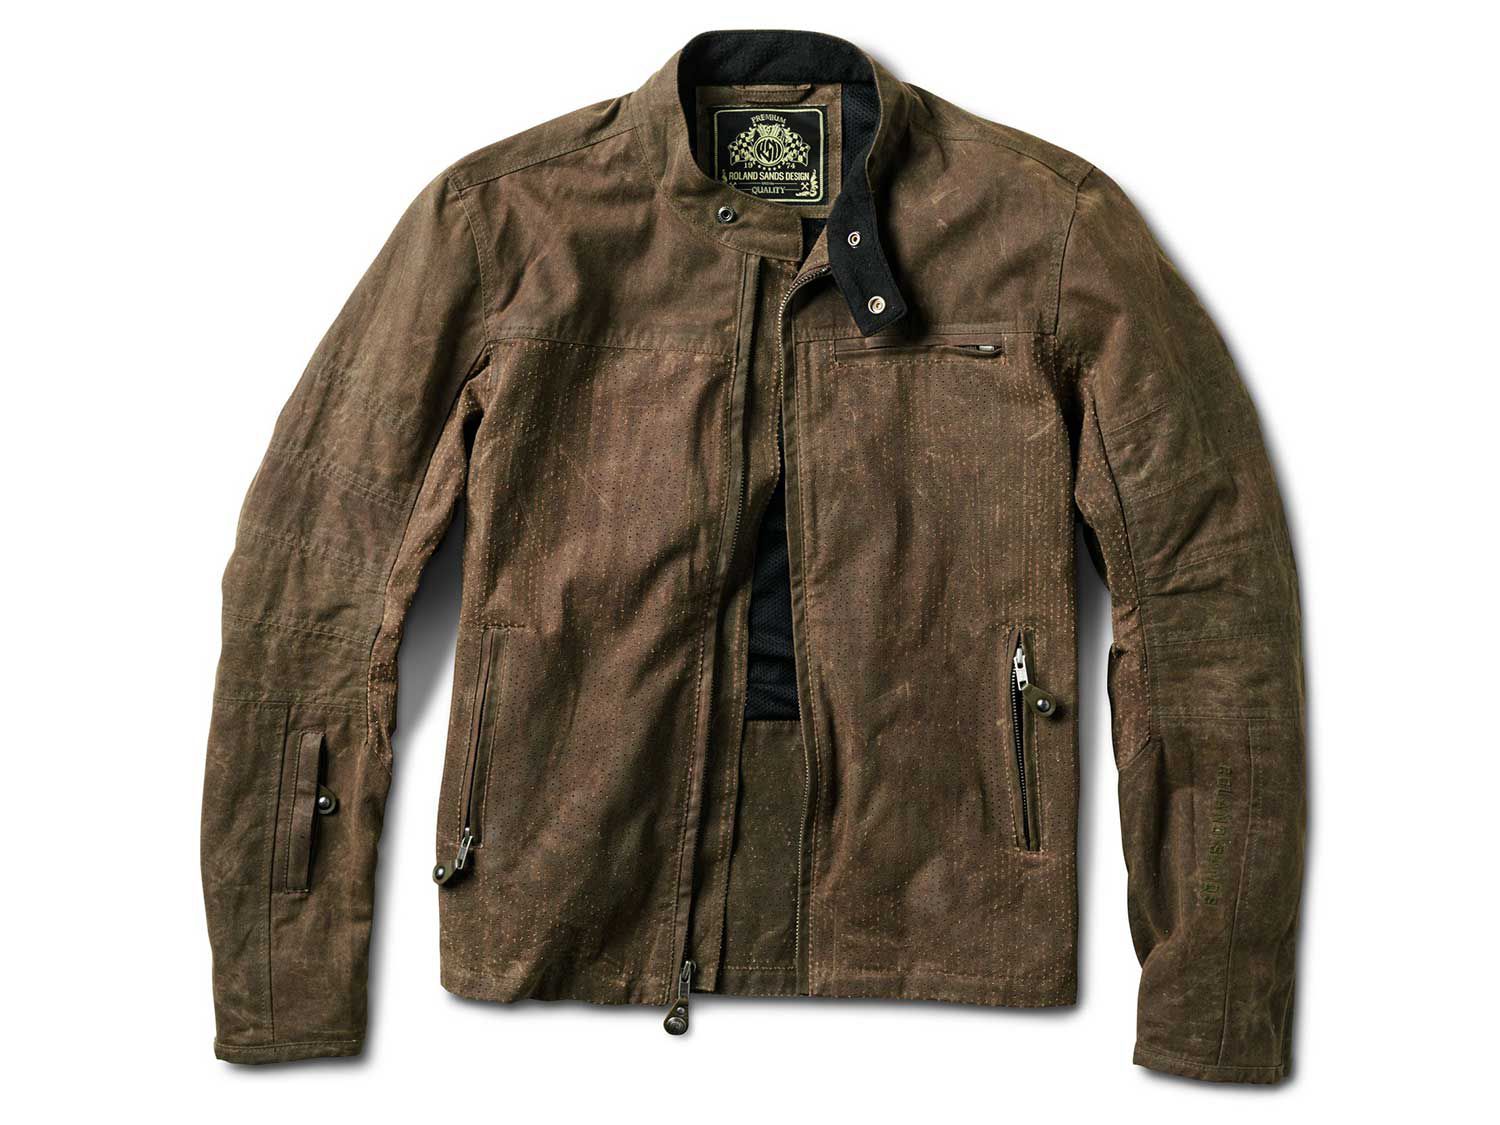 7 Of Our Favorite Summer Riding Jackets